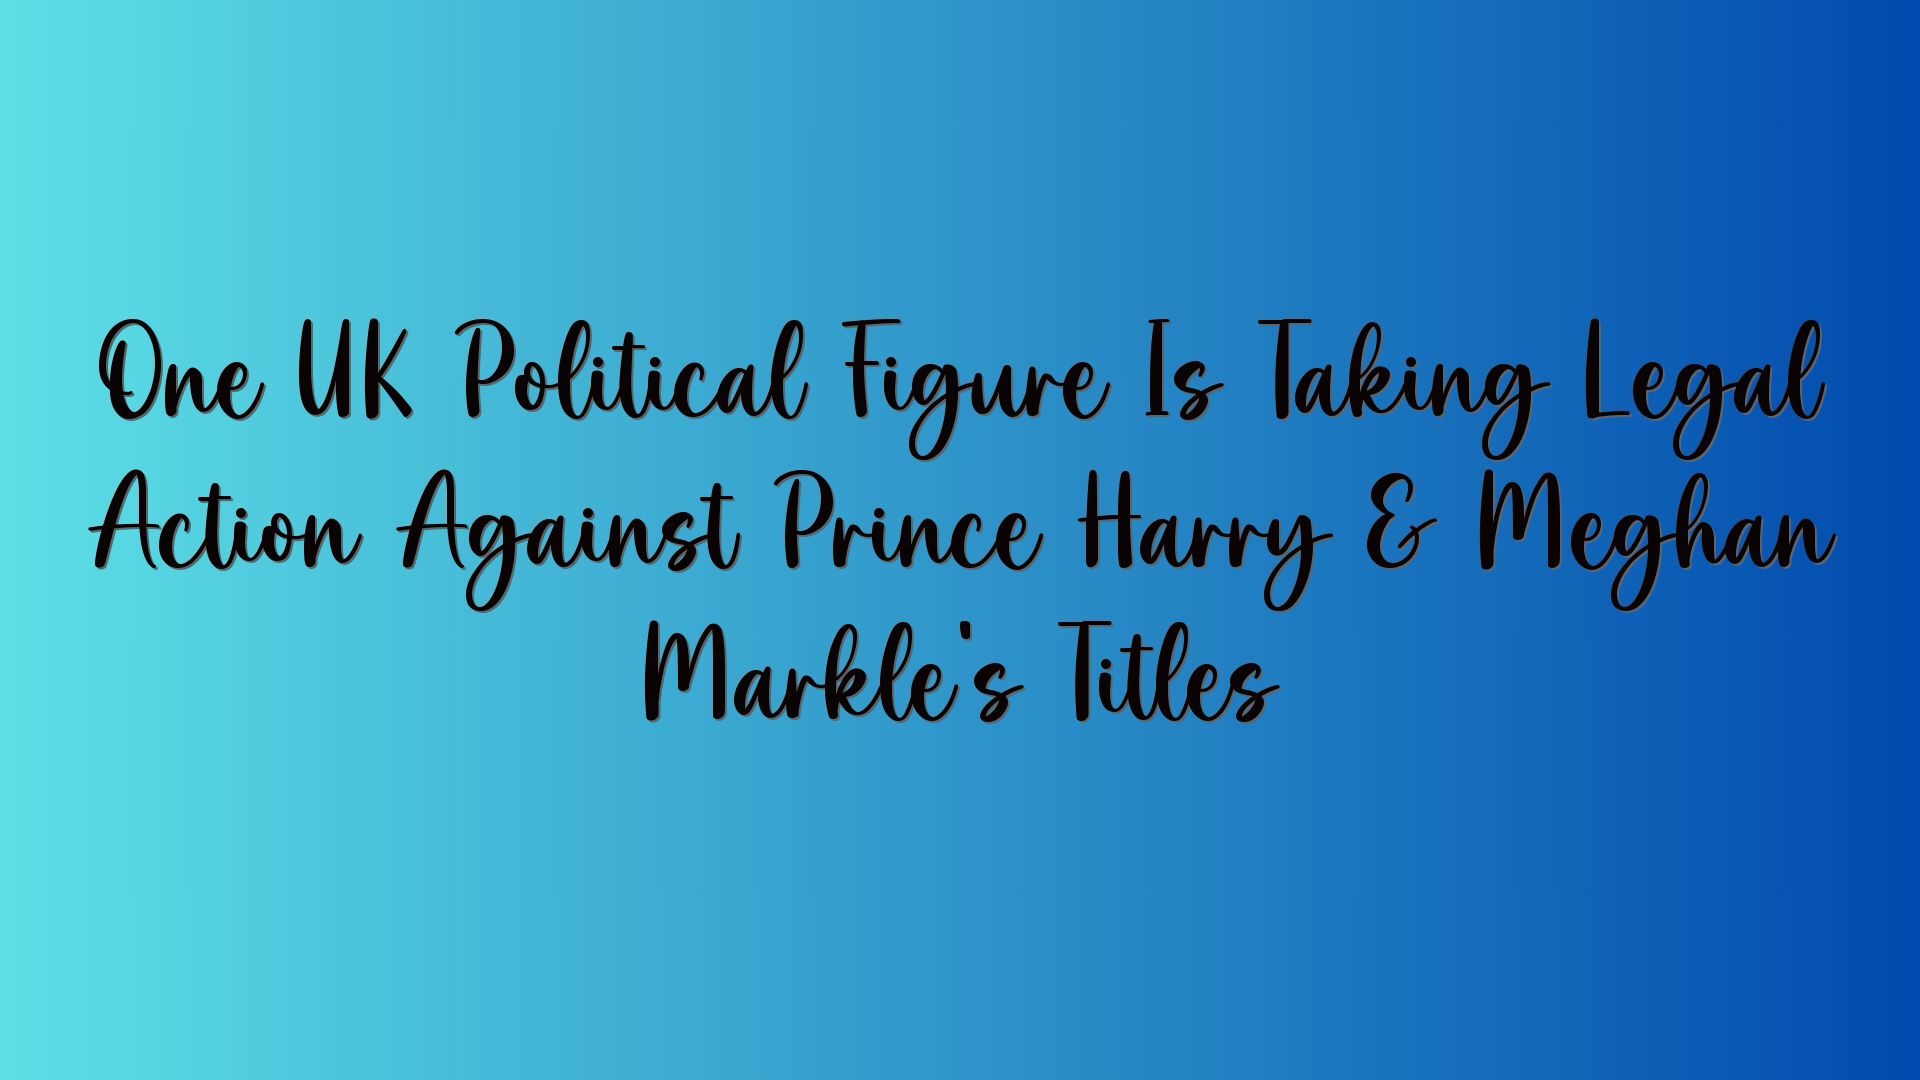 One UK Political Figure Is Taking Legal Action Against Prince Harry & Meghan Markle’s Titles